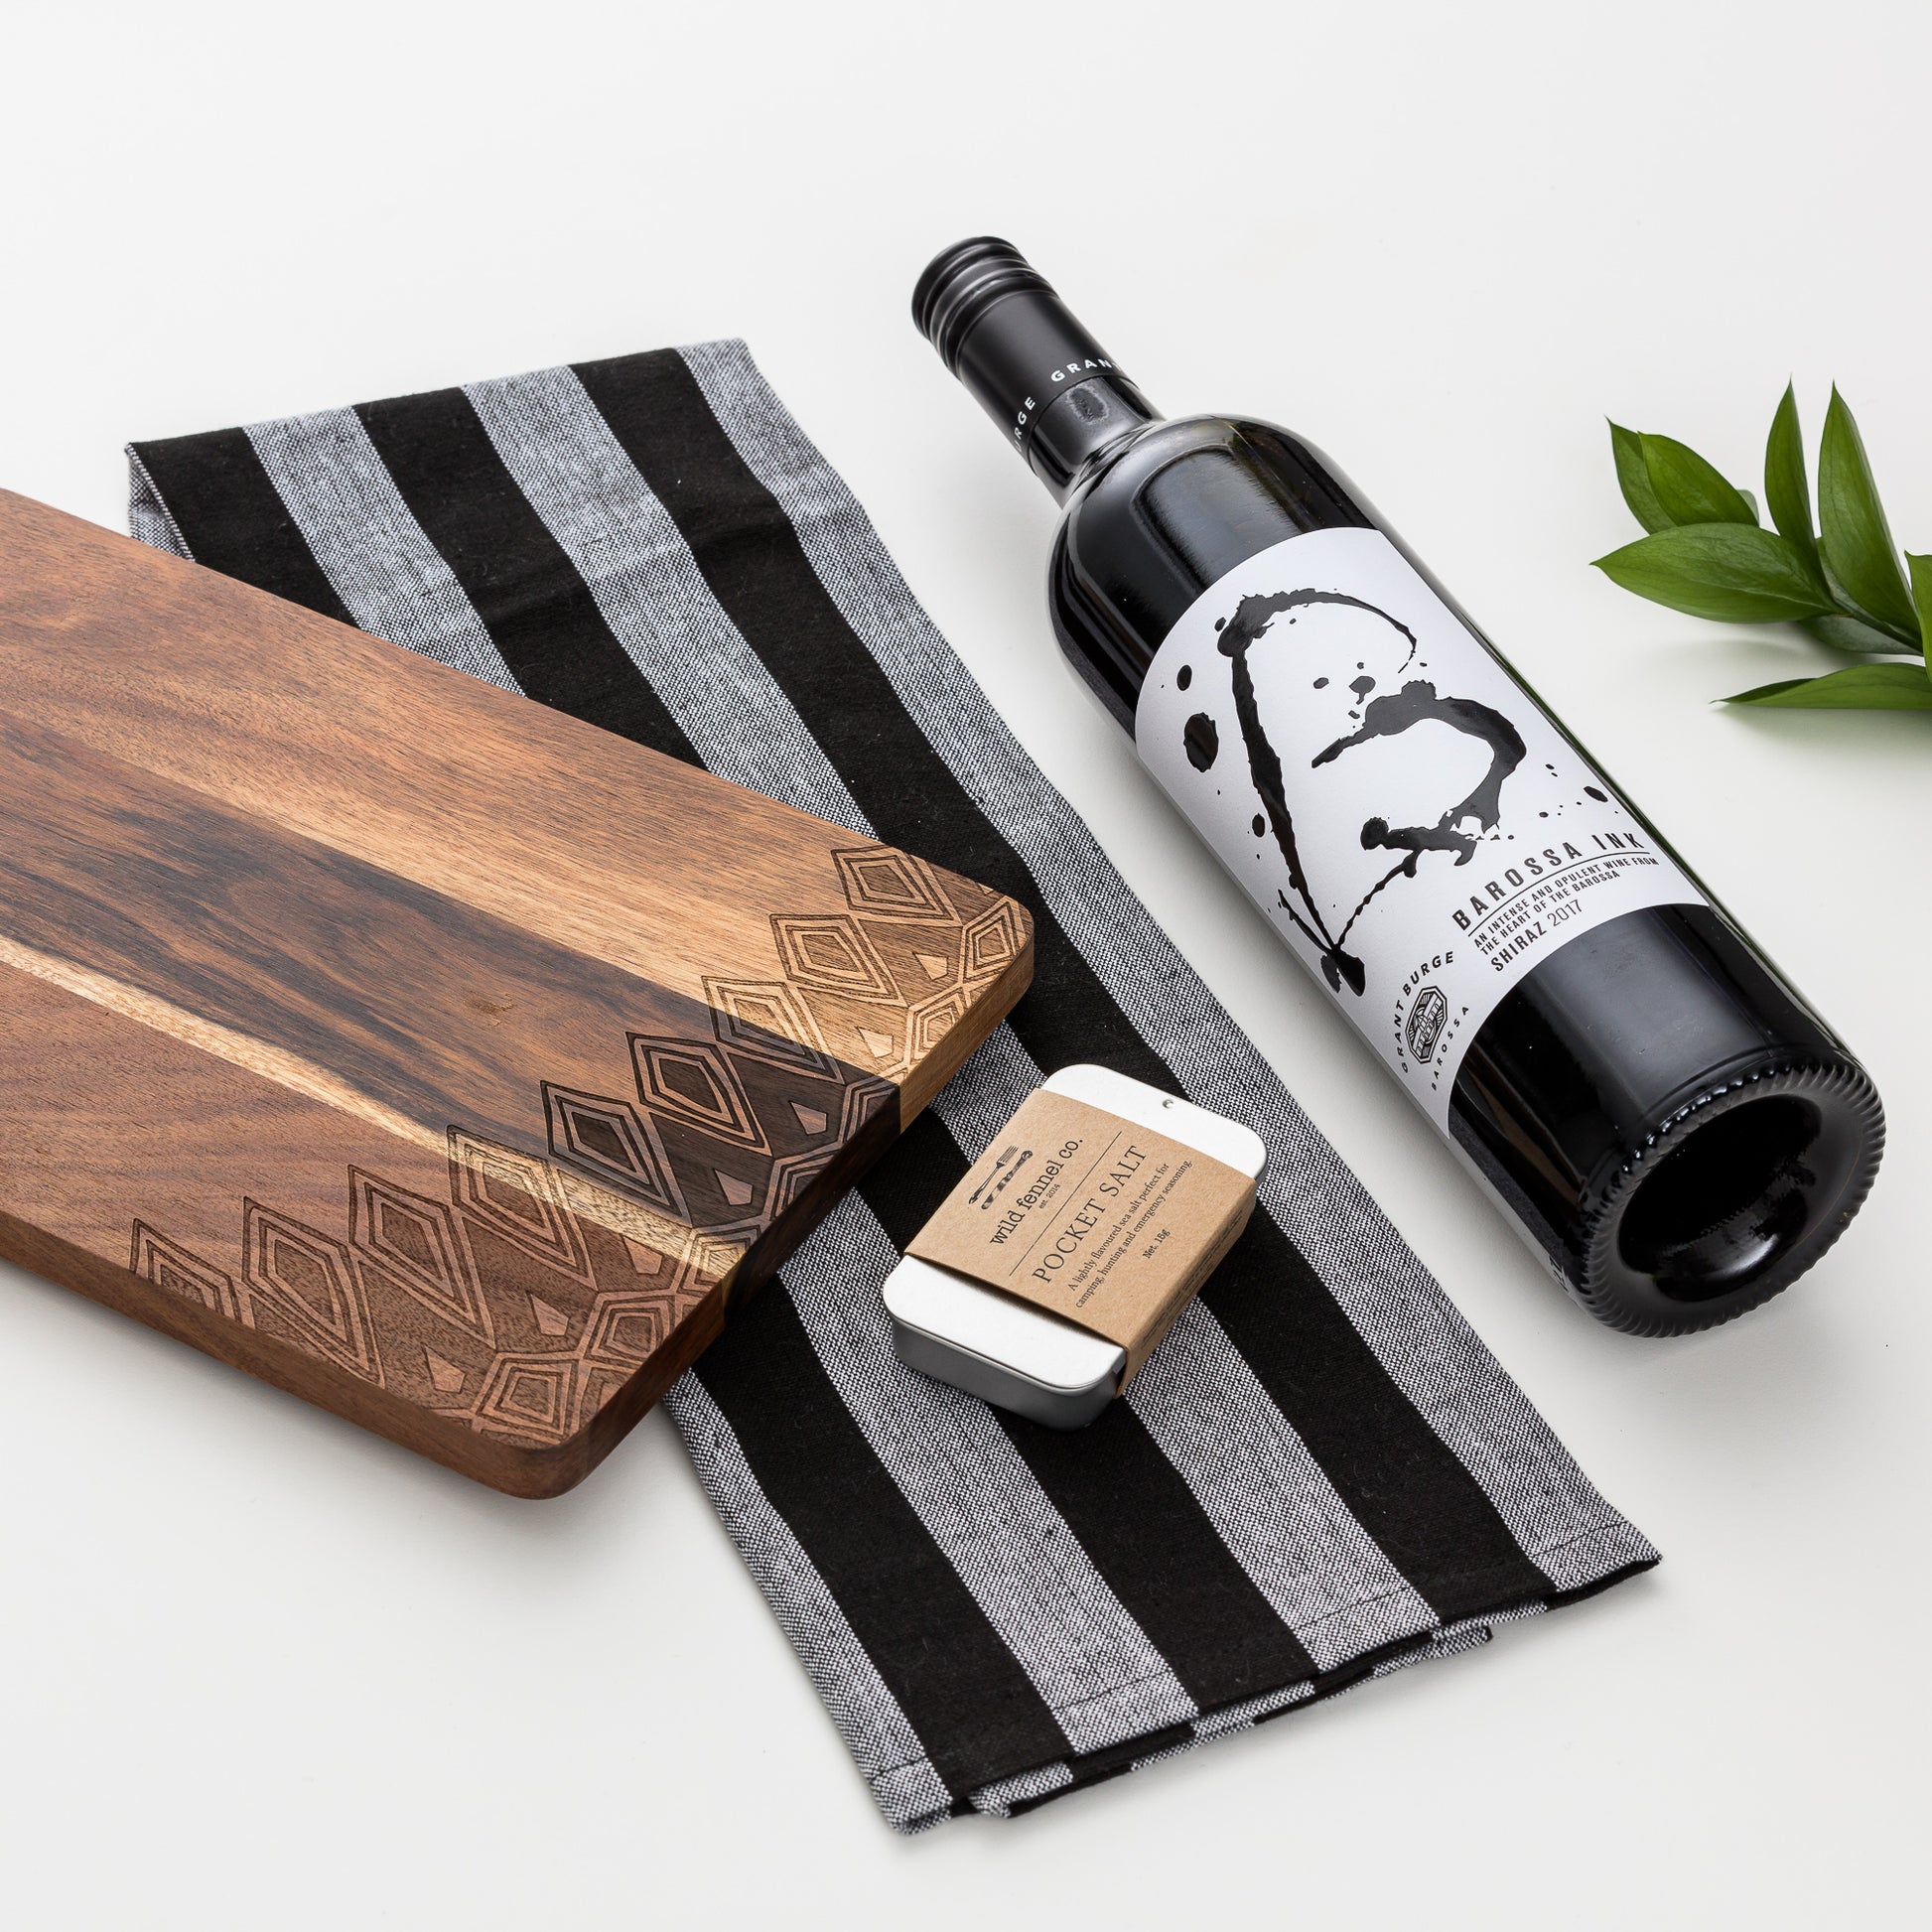 Close up of products displayed out of gift box. Red wine, seasoning, tea towel and decal wooden board.